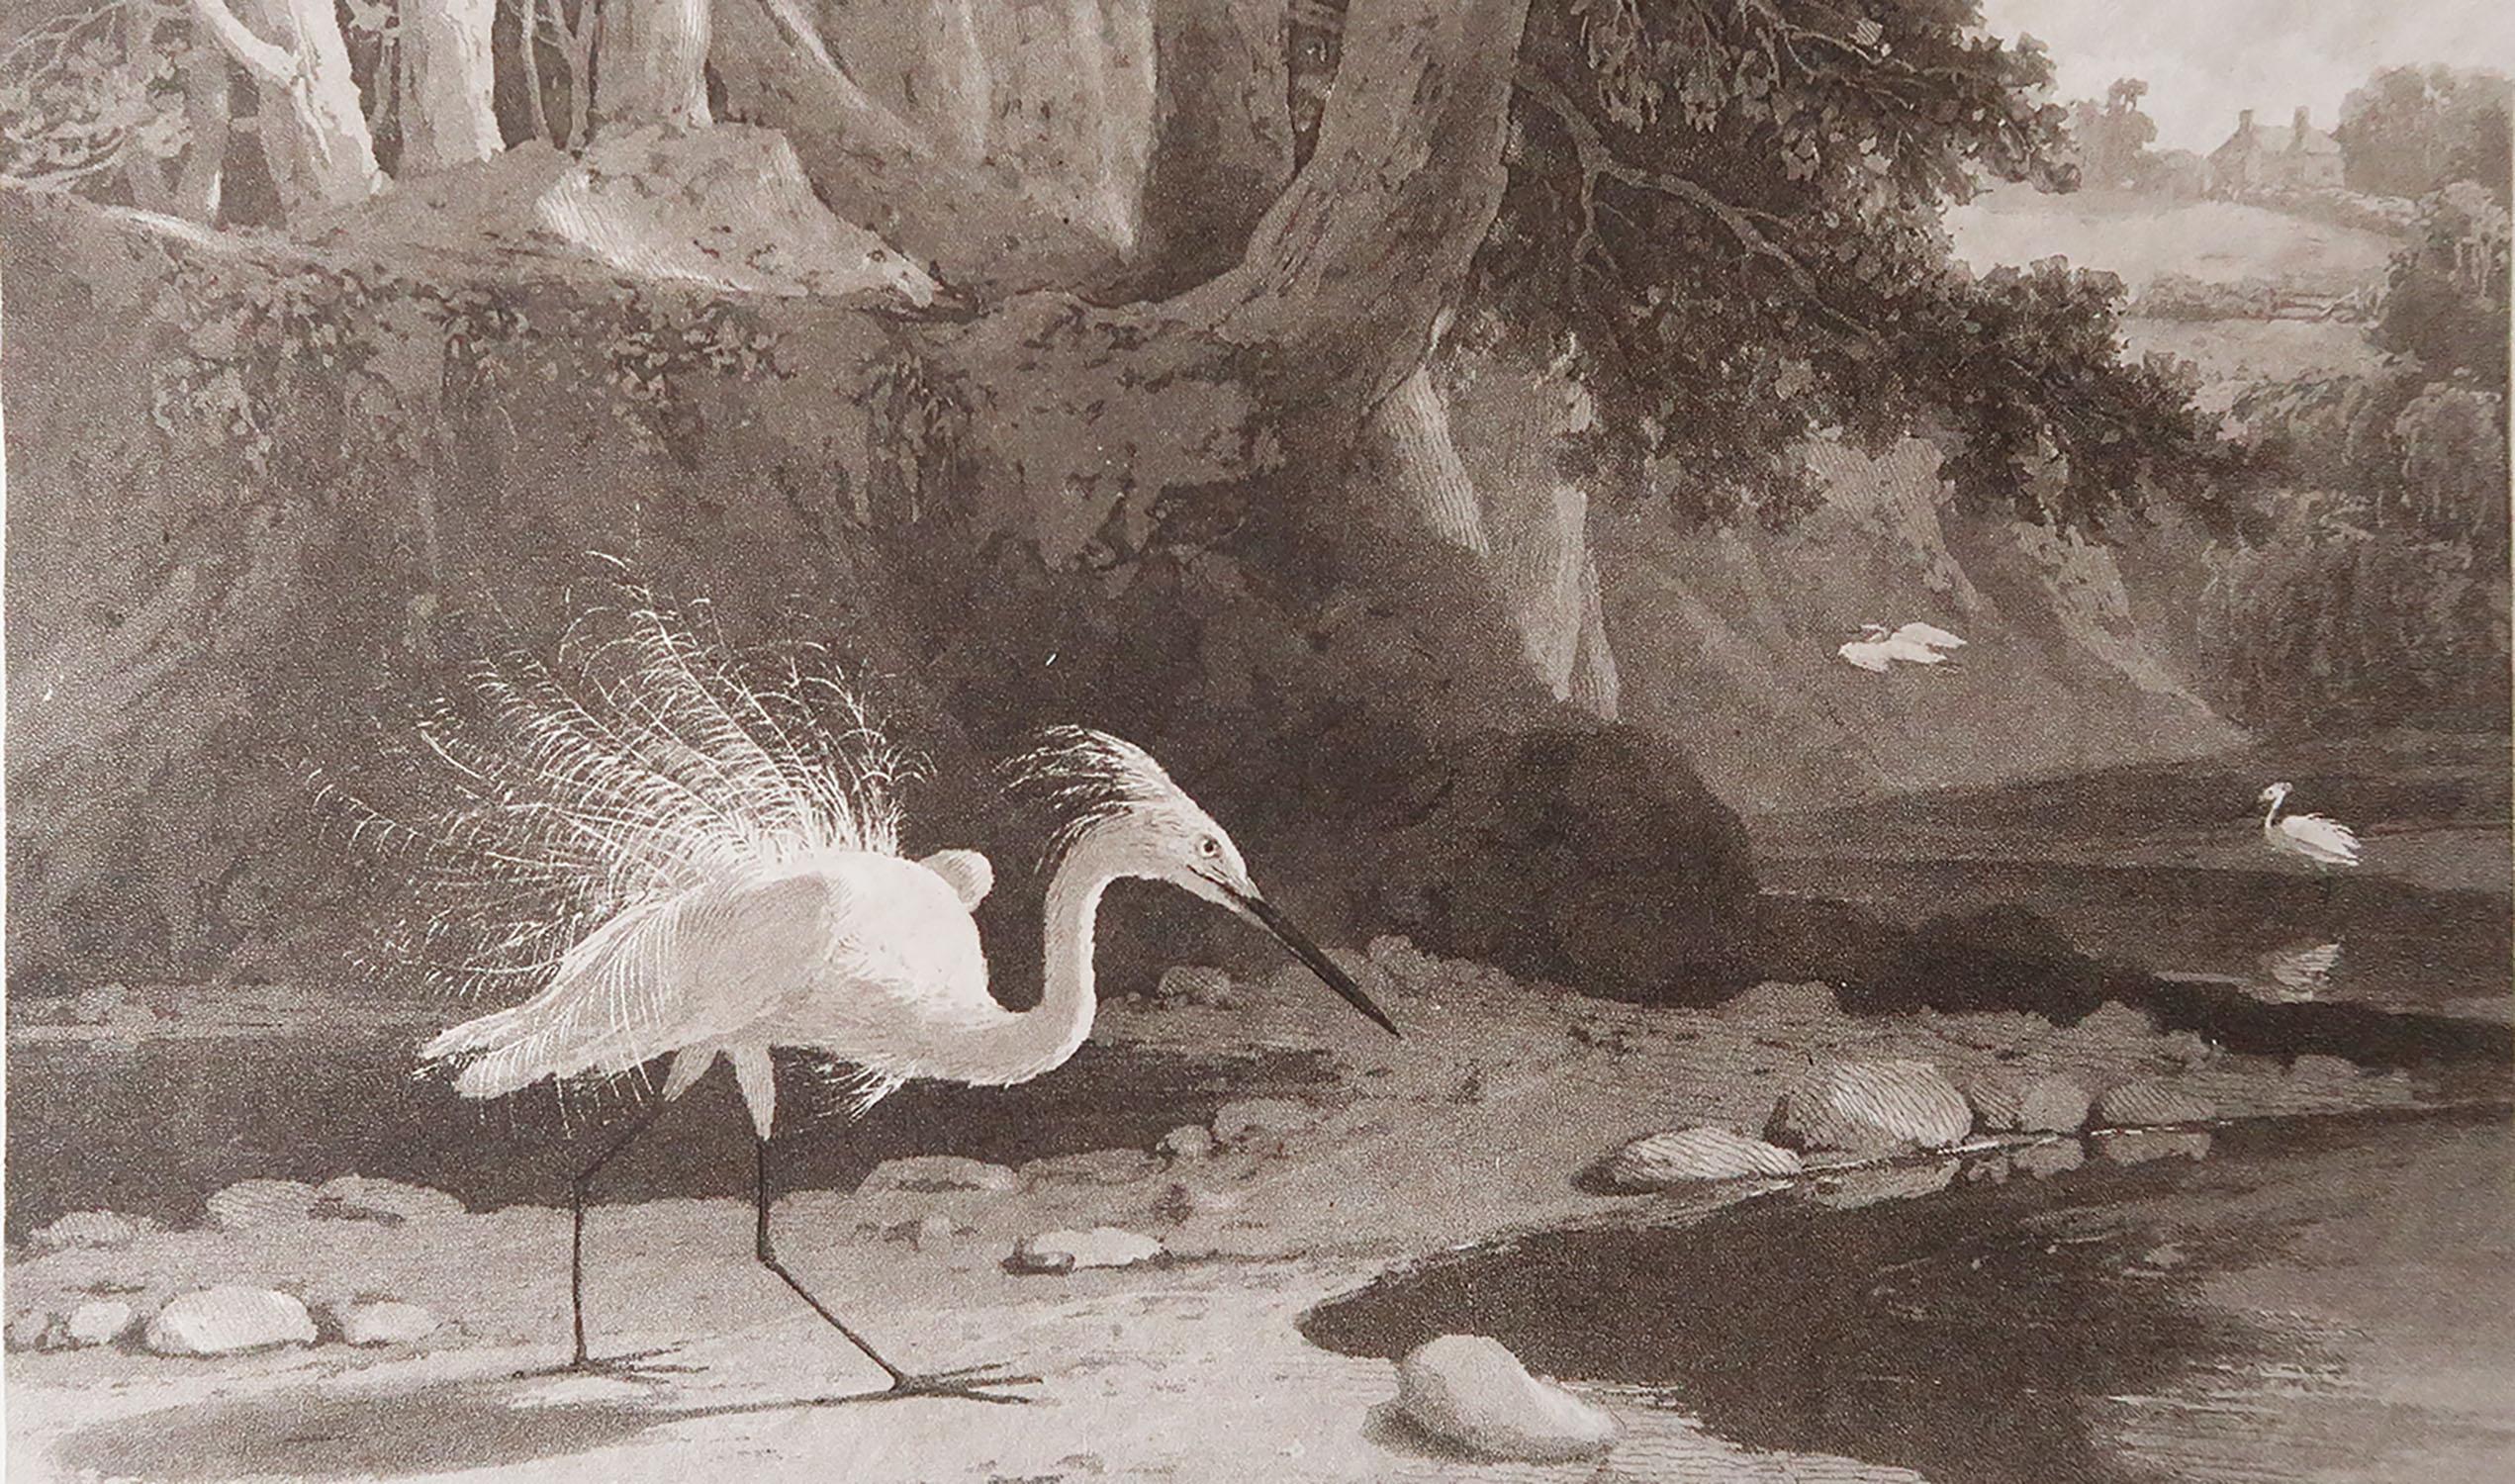 Great image of an egret

Drawn and engraved by William Daniell

Aquatint engraving on fine Japan paper

Published by Cadell & Davies 1812

Unframed.